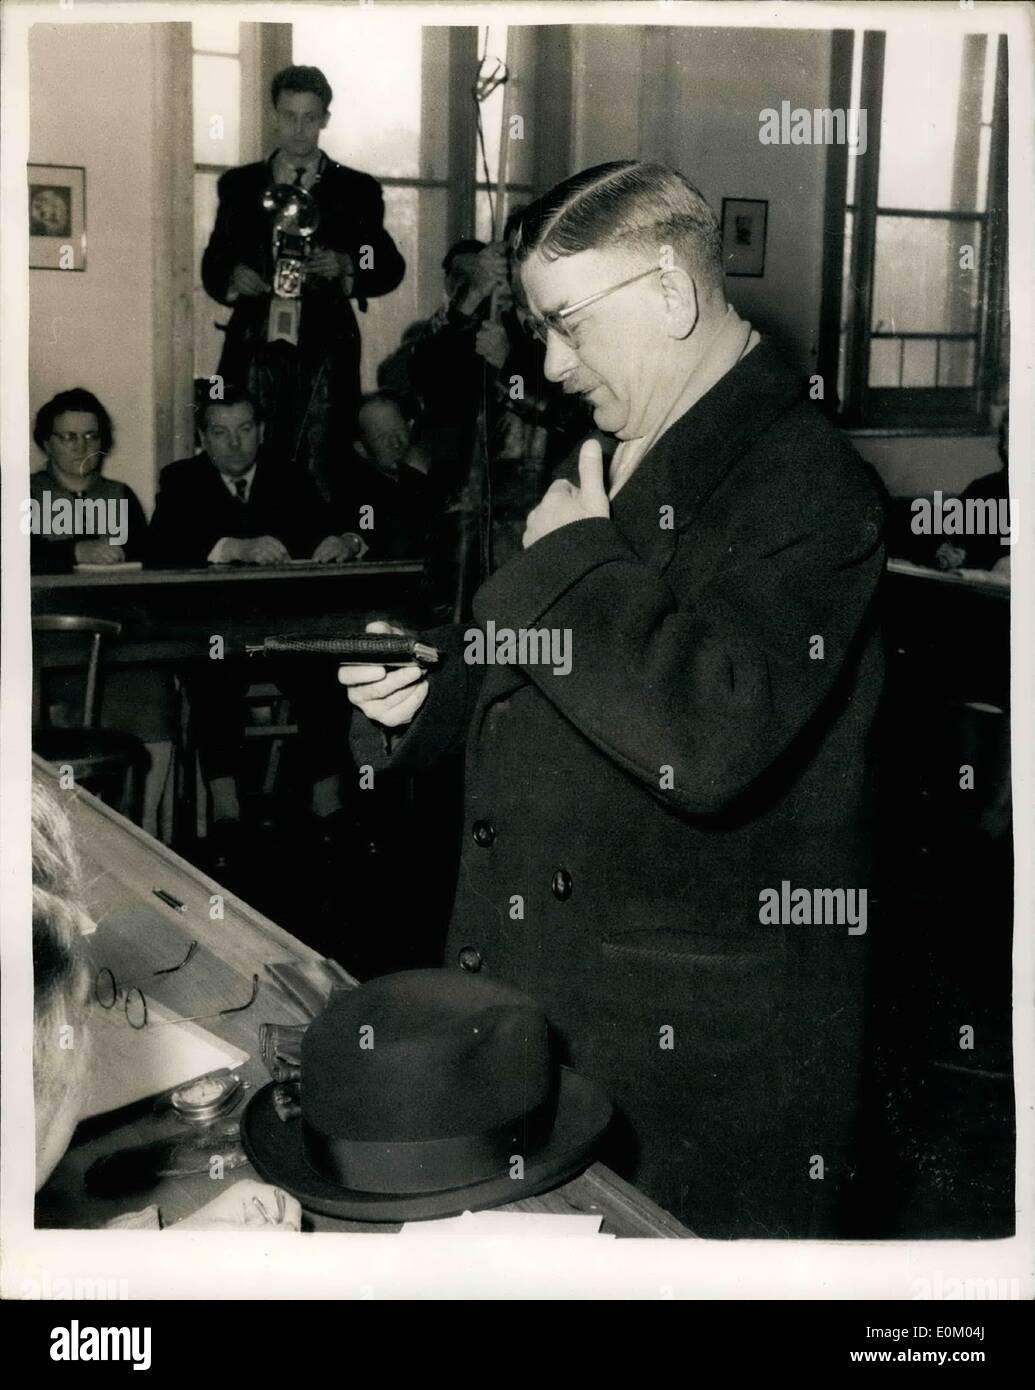 February 2, 1953, Vienna, Austria: Catholic win by photo-finnish In Austran elections in 1953. Chancellor LEOPOLD FIGL casts his vote in Vienna. The Catholic-Conservative People's Party won the Austrian General election by One seat over the Socialists 974 to 73, with League, Independents (Neo-Nazi) 14 and the People's Opposition (Communist) 4. Stock Photo